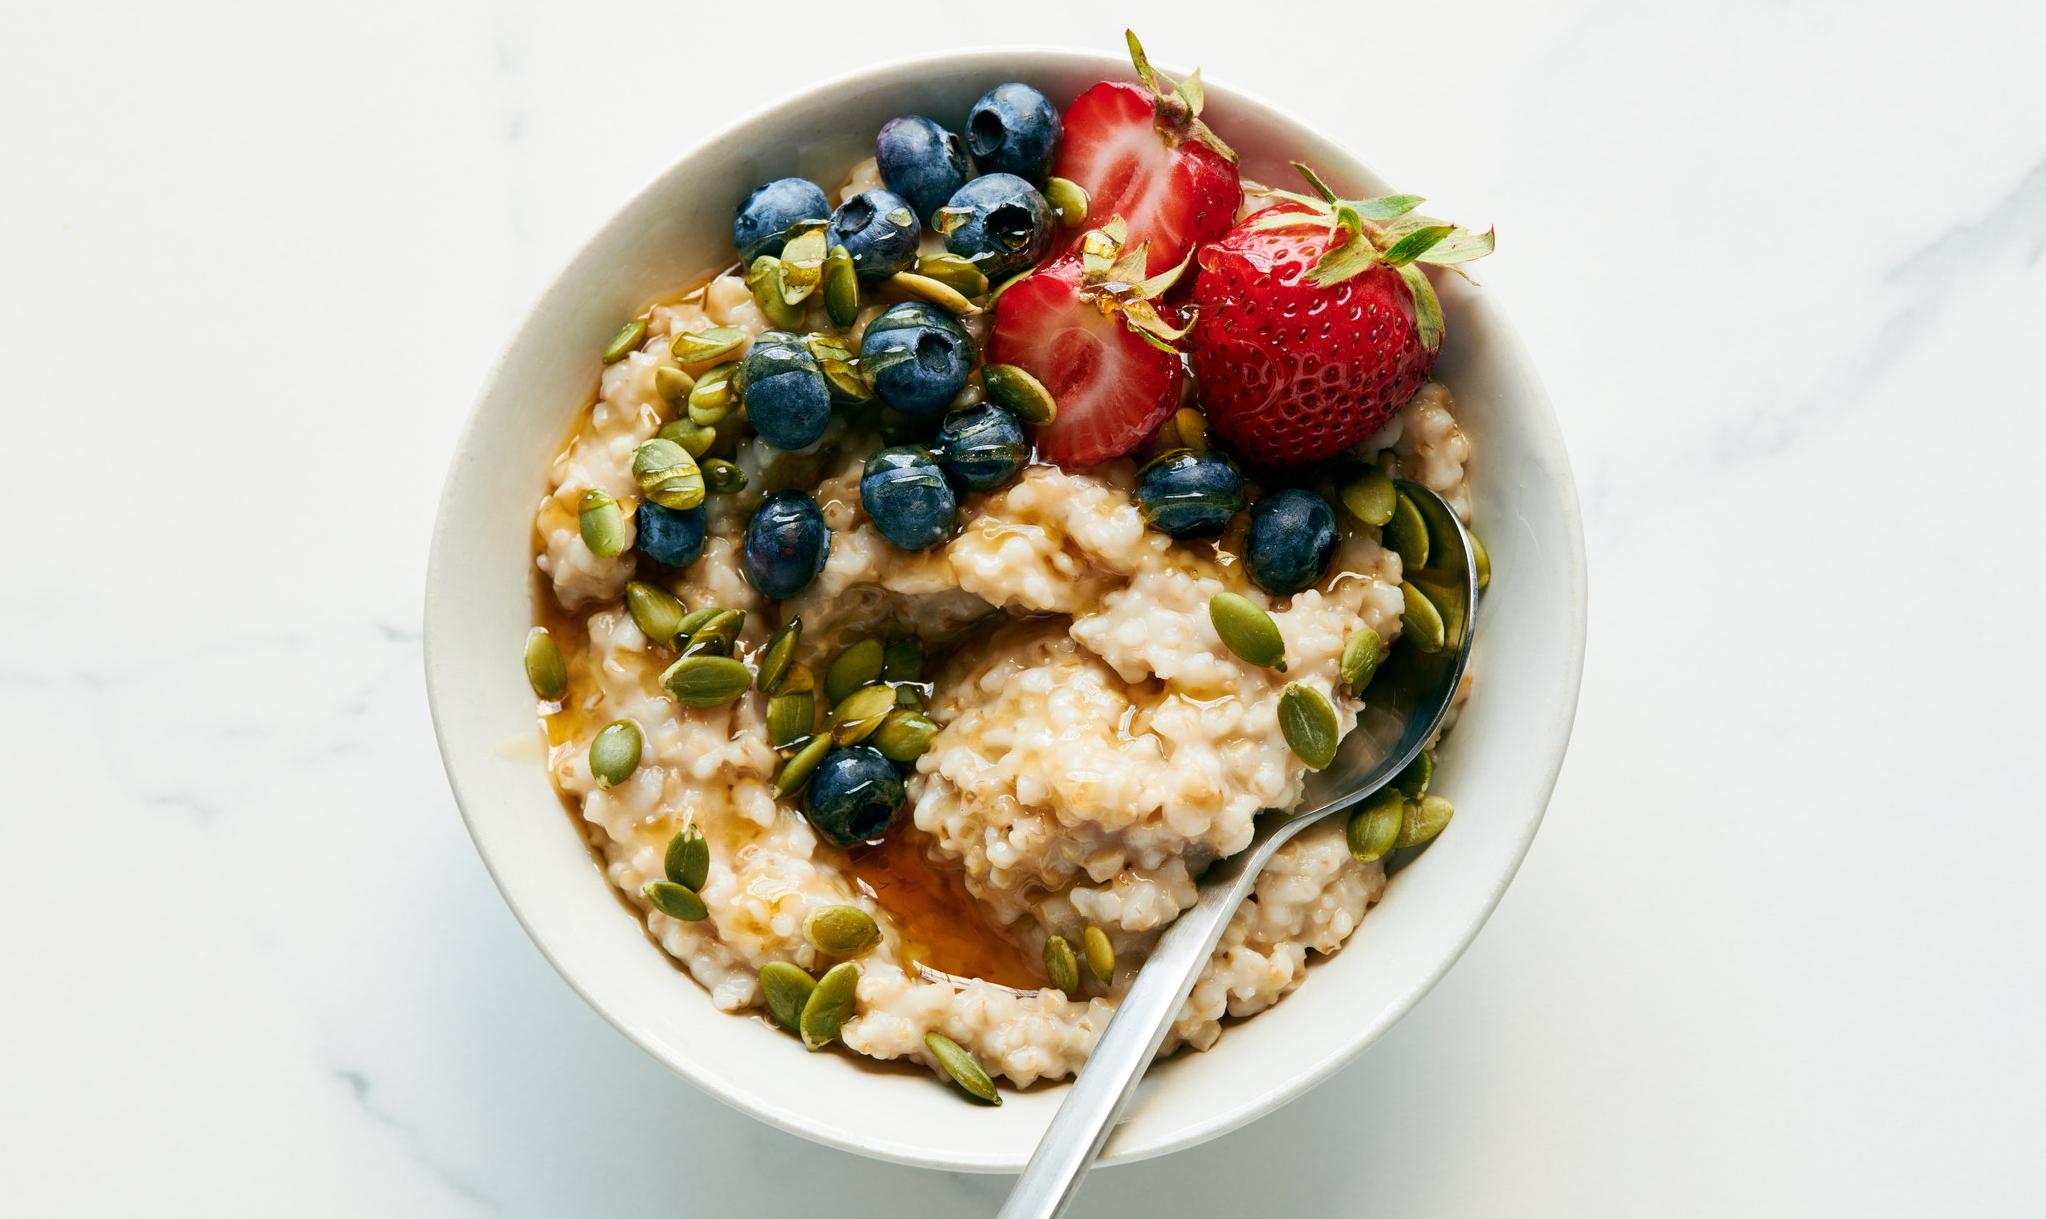  Thick and hearty Scottish oatmeal, cooked to perfection in a rice cooker!